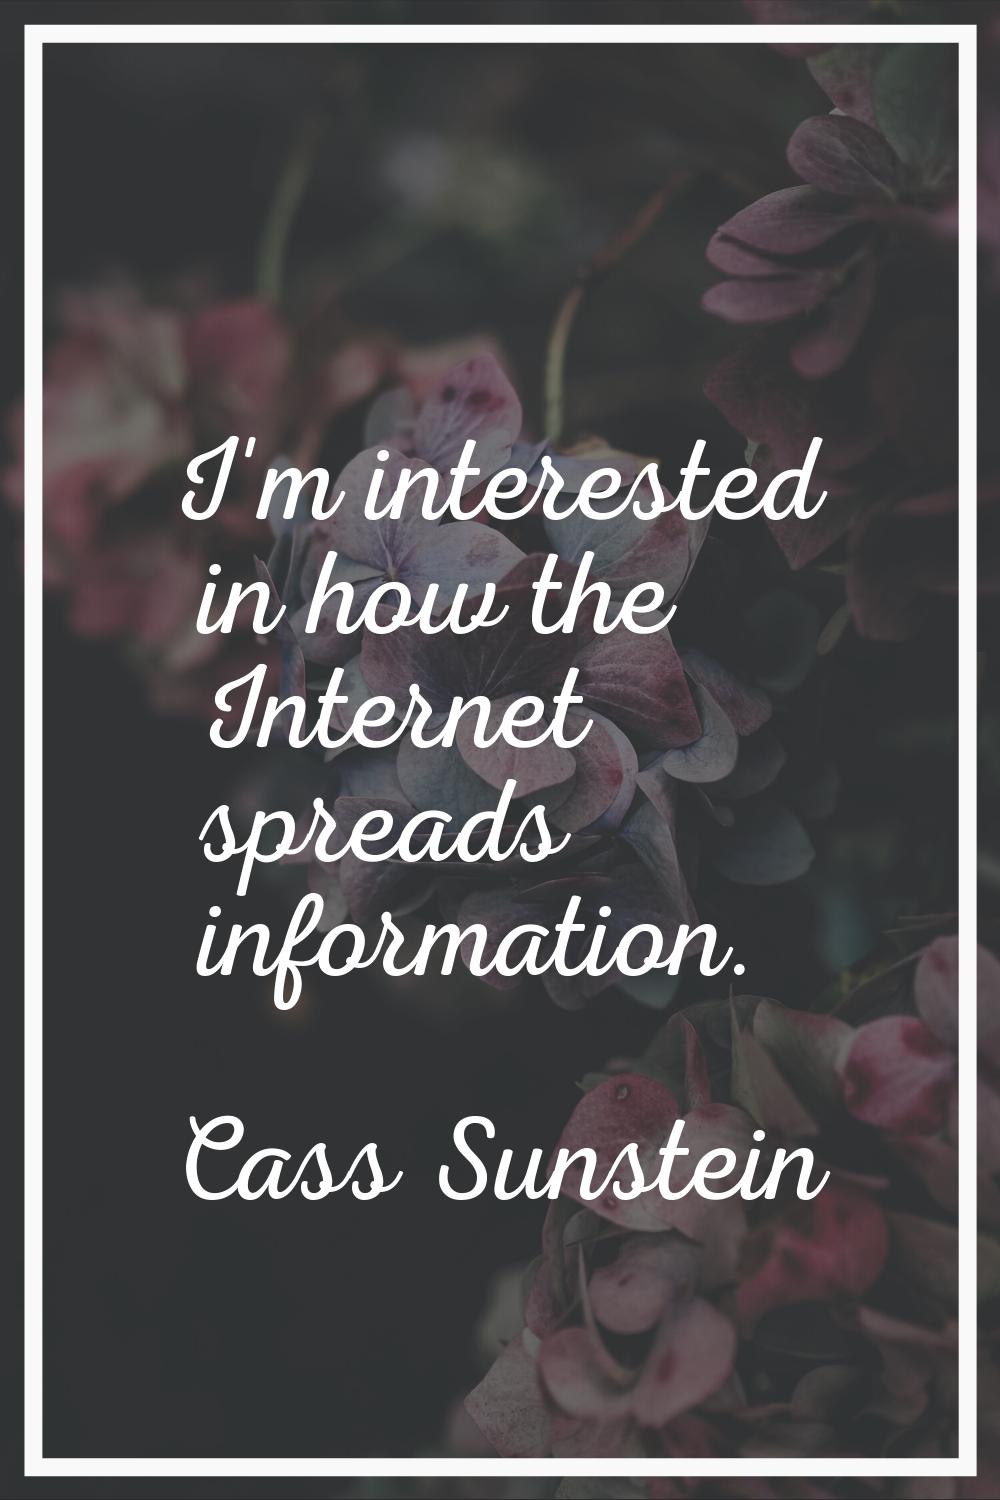 I'm interested in how the Internet spreads information.